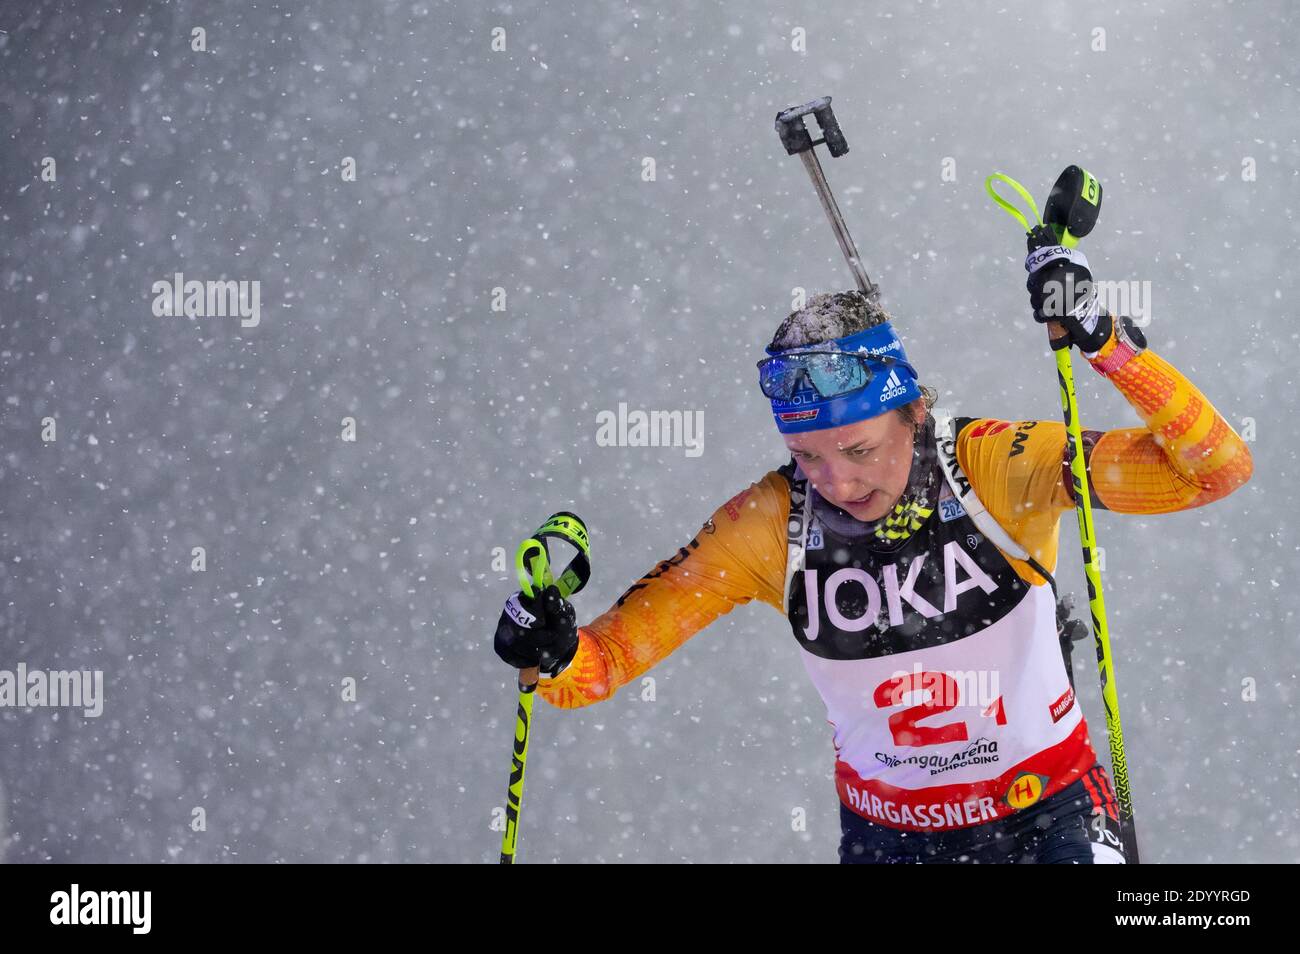 Ruhpolding, Germany. 28th Dec, 2020. Biathlon: World Team Challenge (WTC),  Pursuit, Mixed in the Chiemgau Arena.